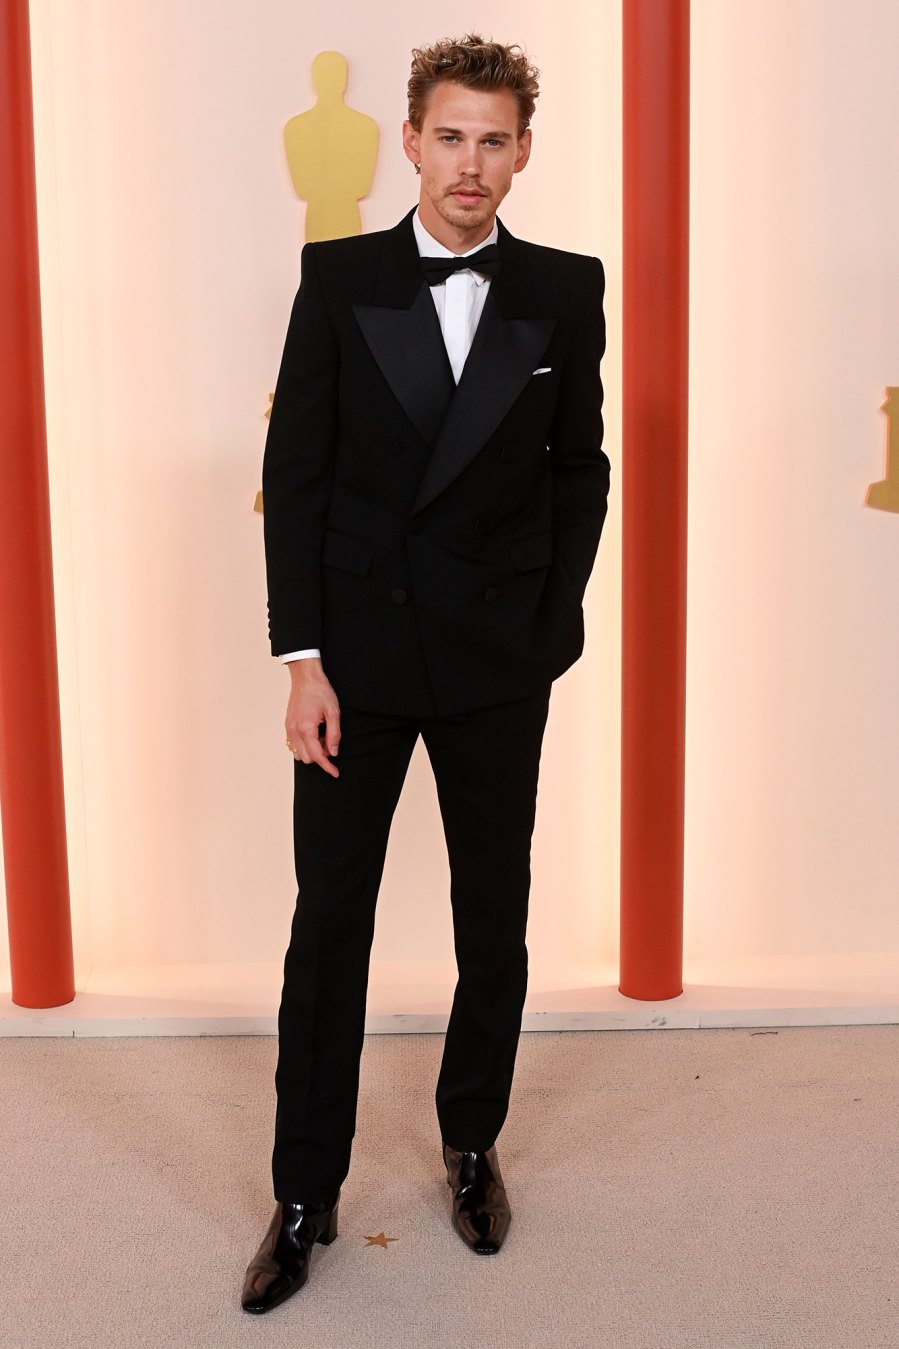 Hottest Hunks at the Oscars 2023